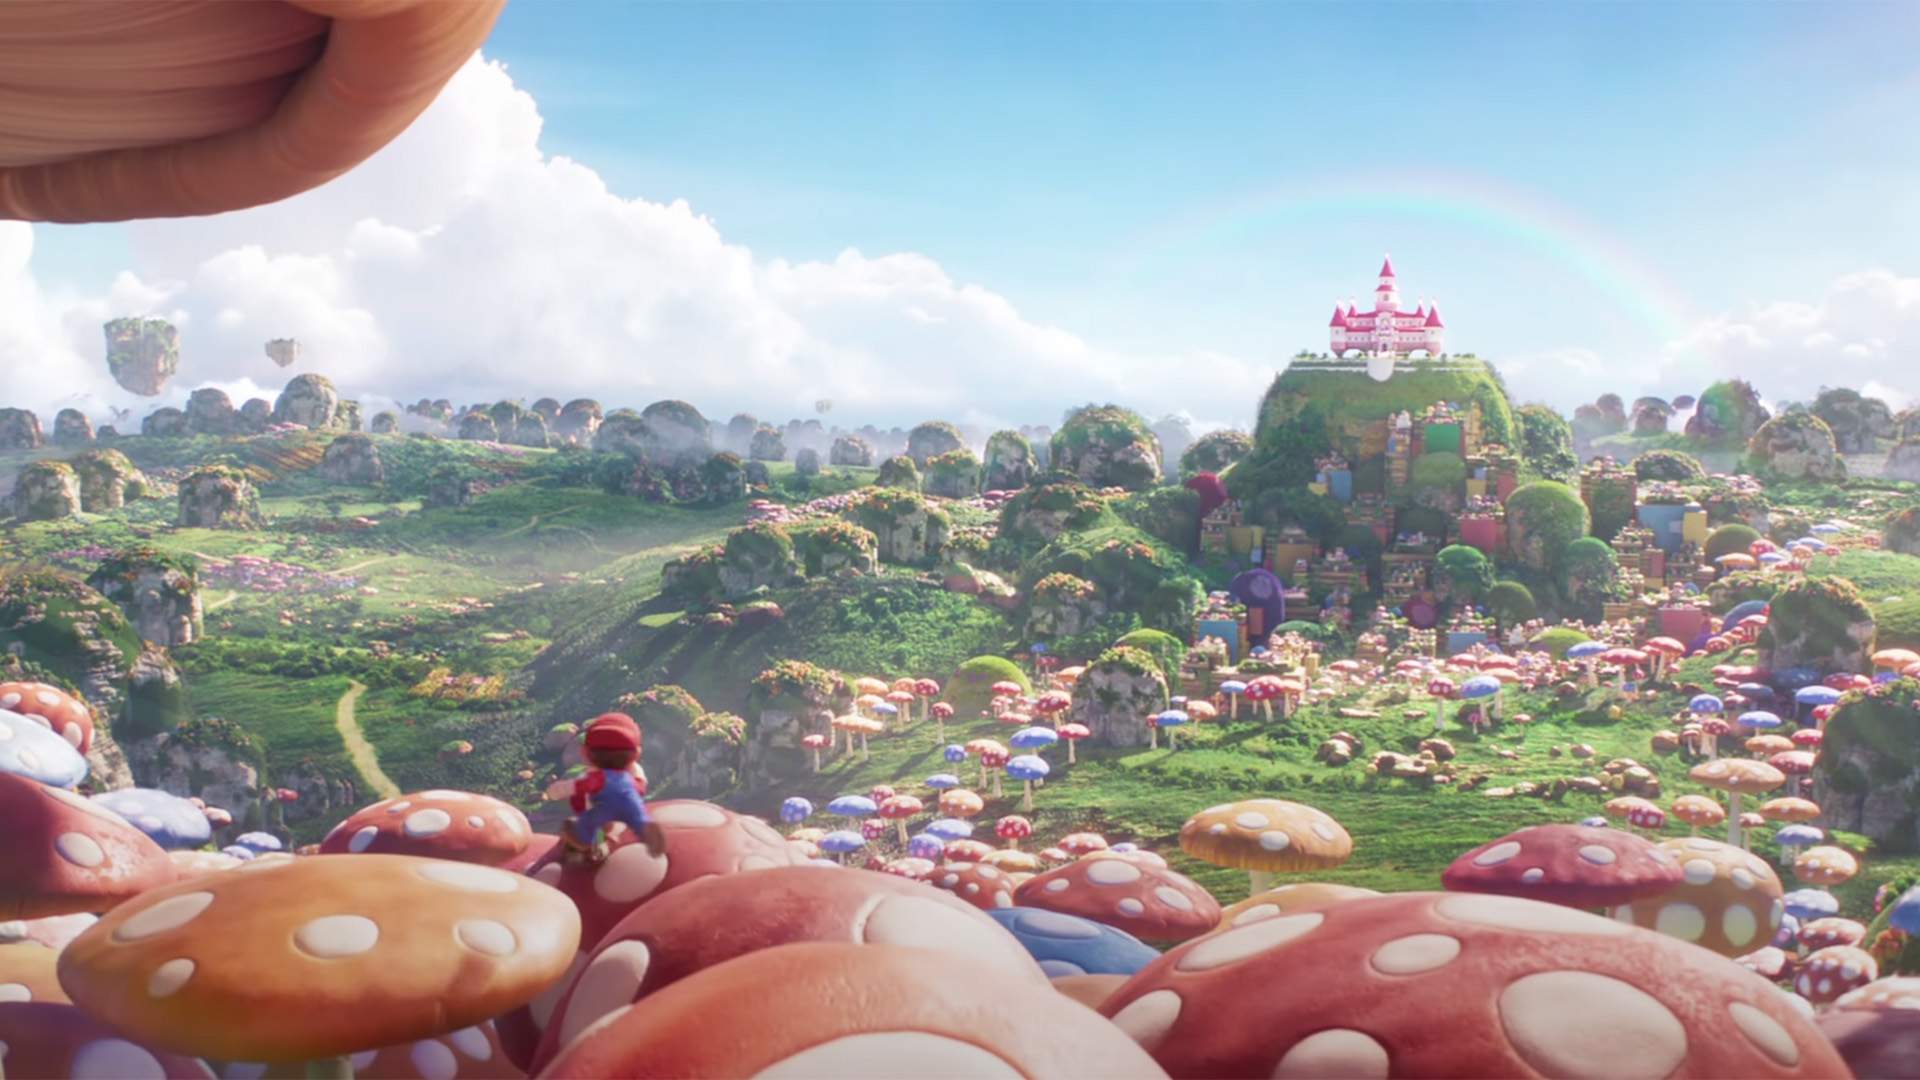 "Mushroom Kingdom, Here We Come": The First Trailer for 'The Super Mario Bros Movie' Is Here